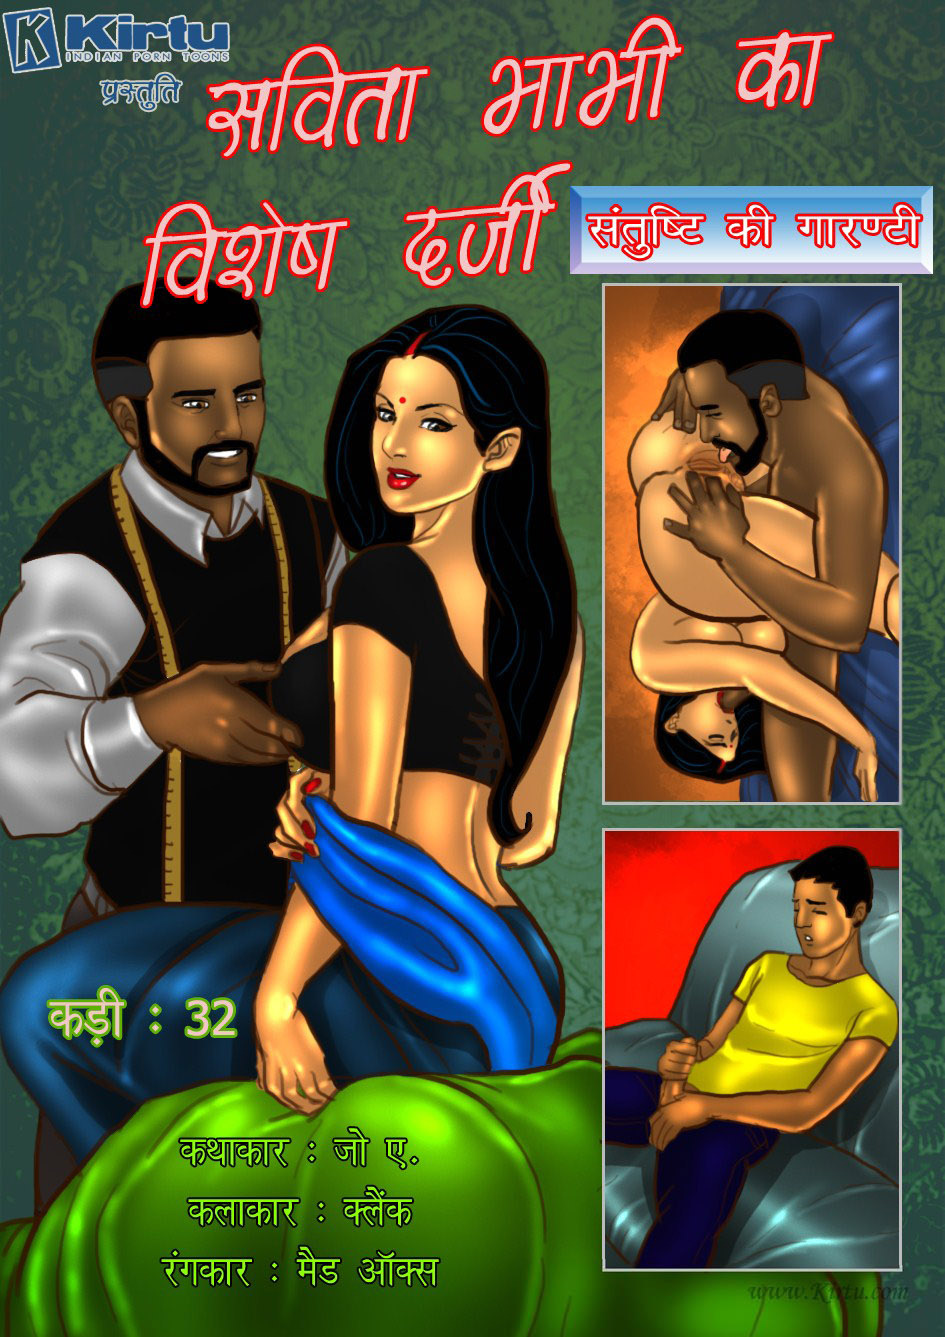 Hindi sex story in english font - Sex archive